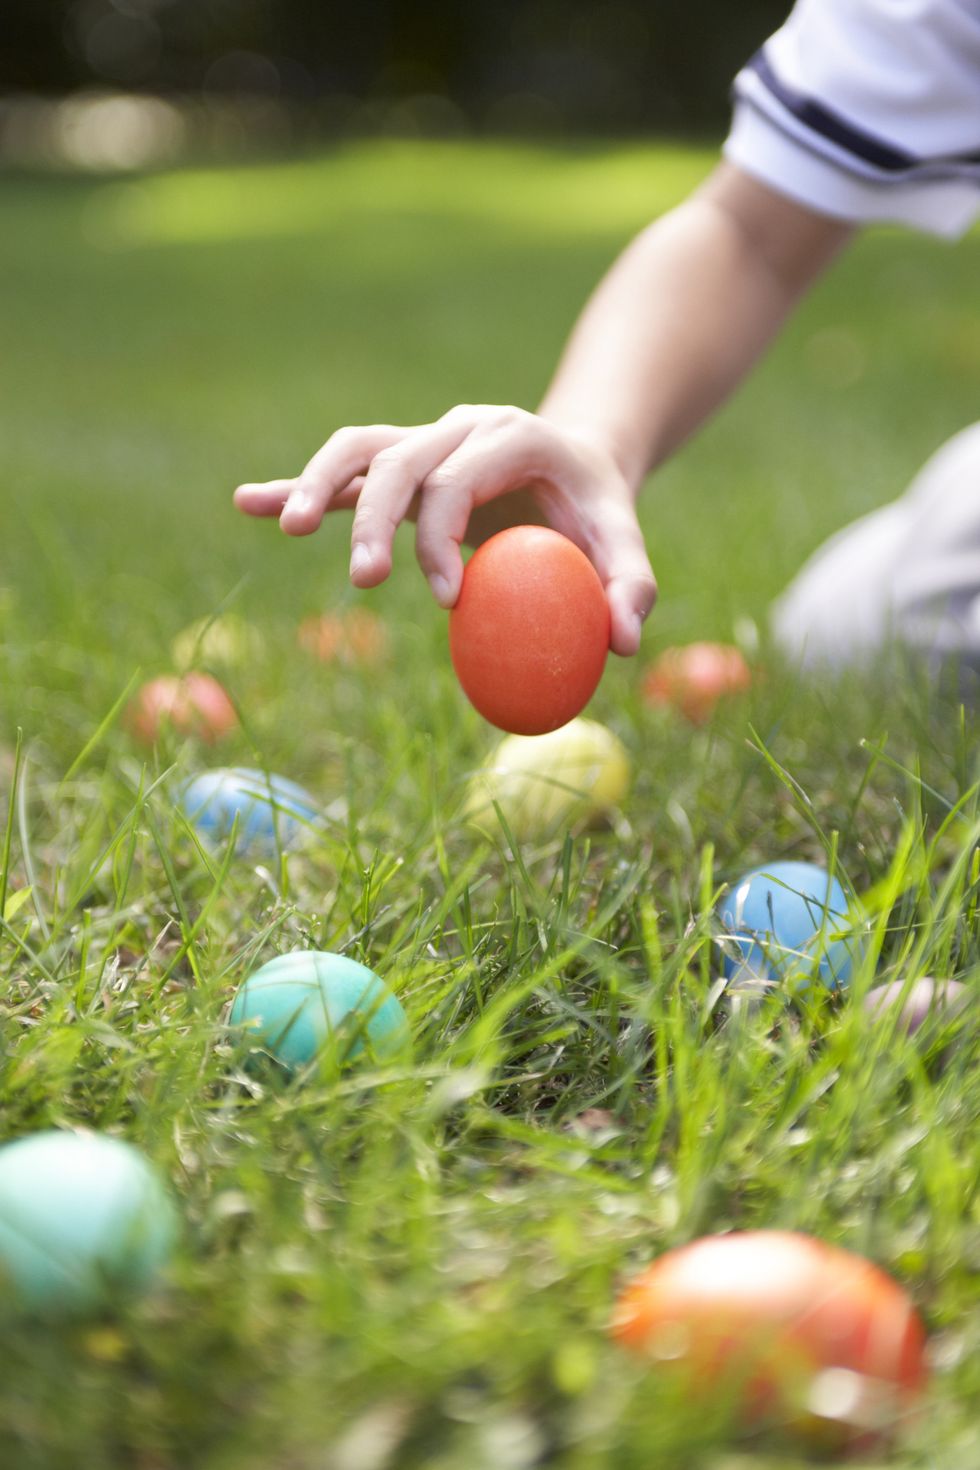 young child picking up orange easter egg among a bevy of colored eggs in grass during color matching easter egg hunt